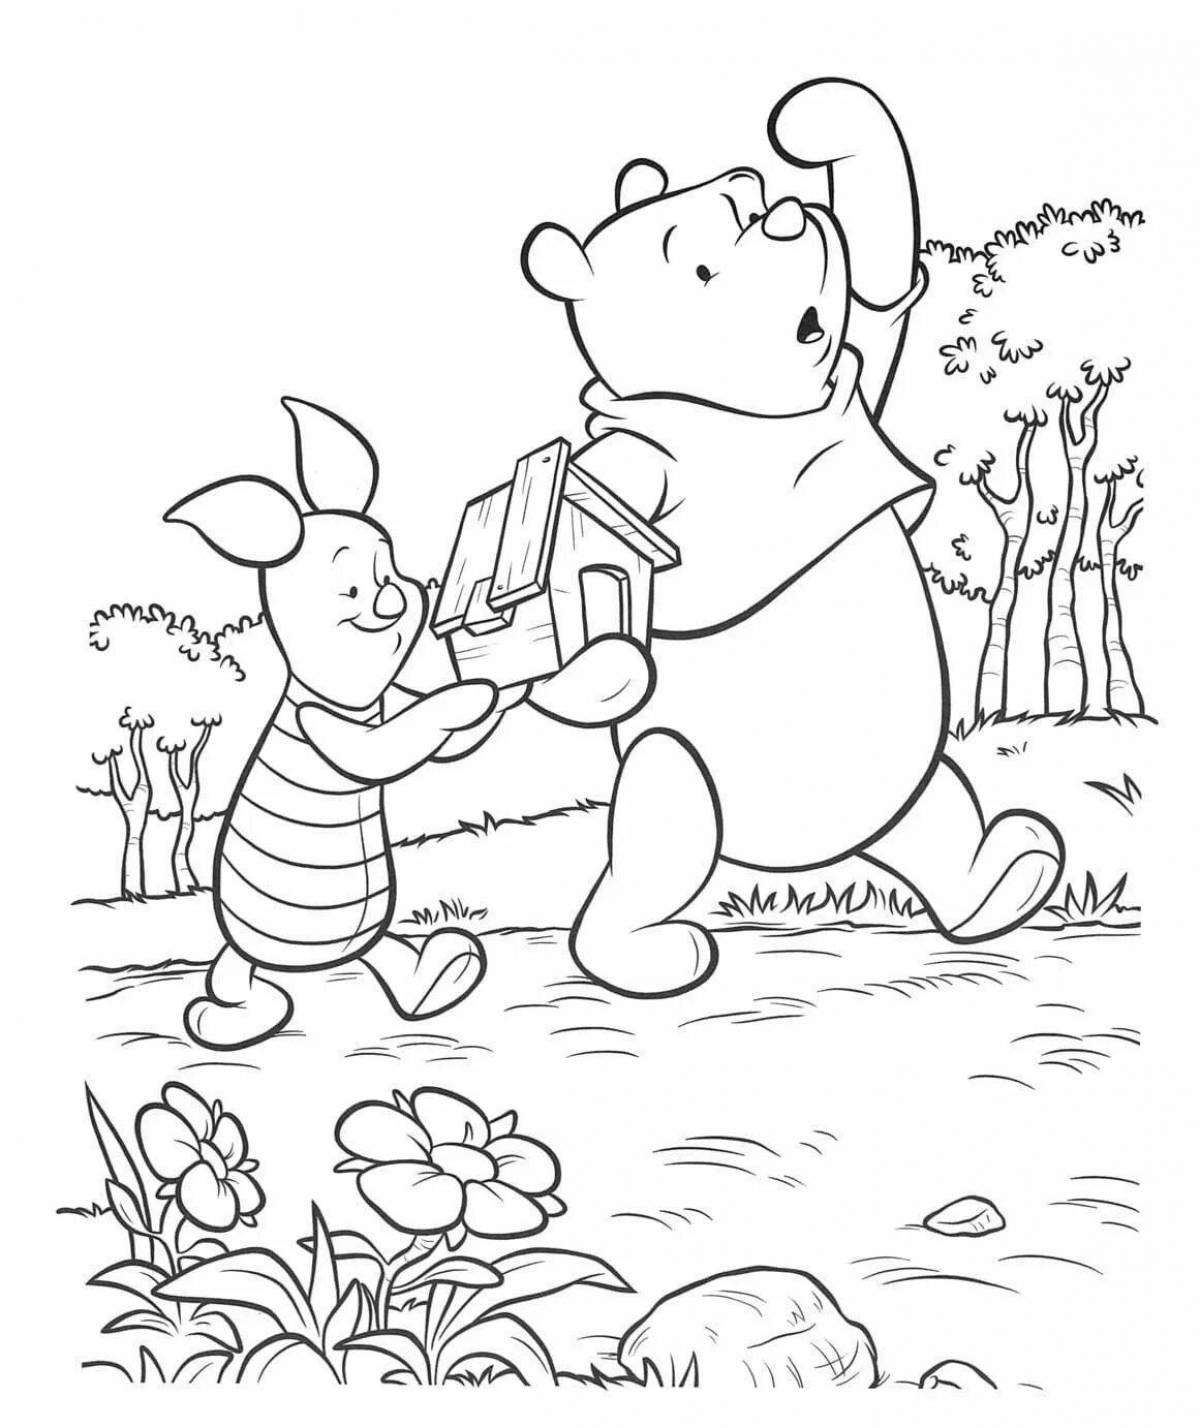 Winnie the Pooh and his friends funny coloring book